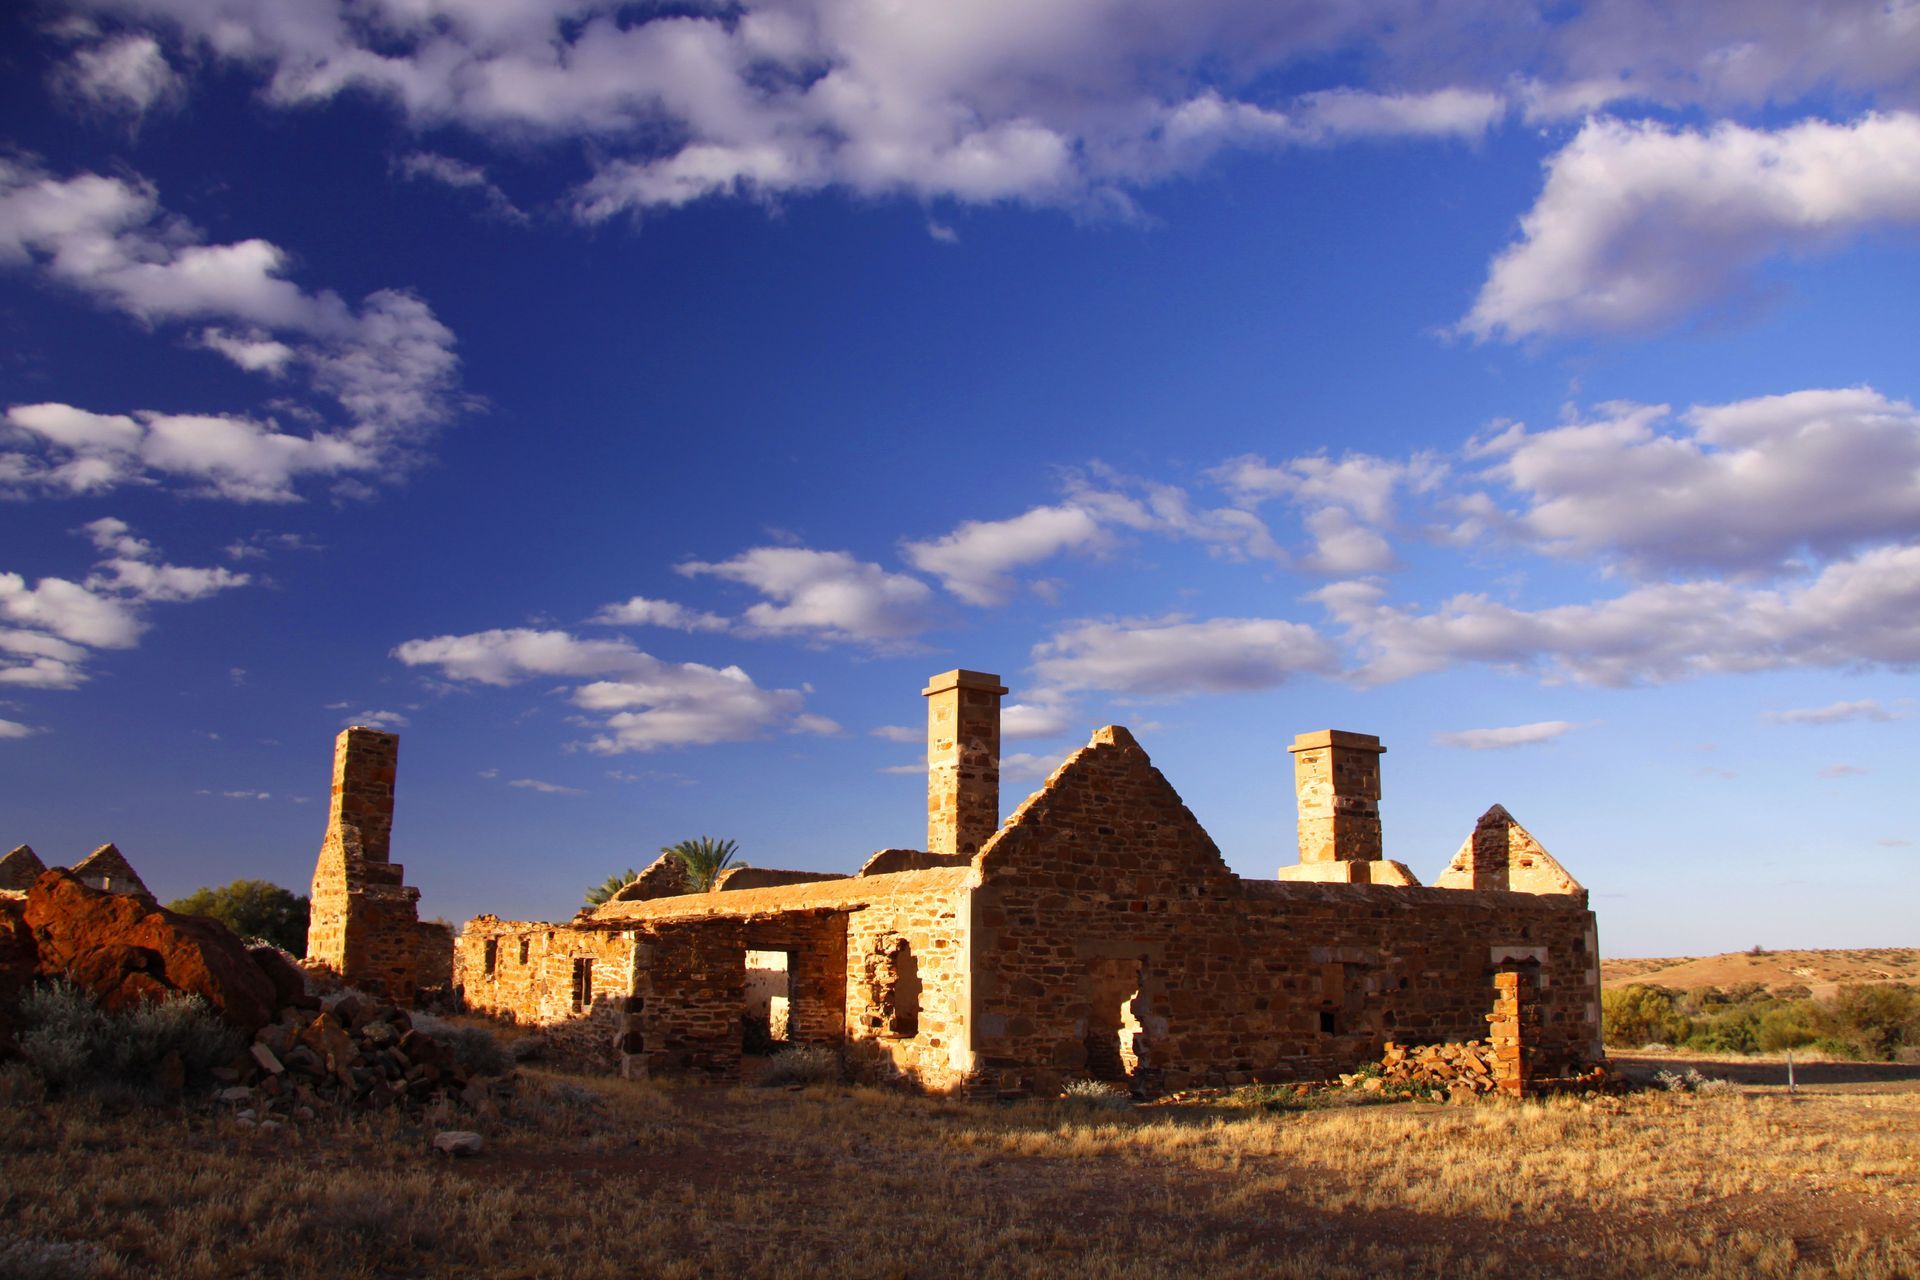 Abandoned buildings in the Australian Outback. The buildings are made of sandstone .